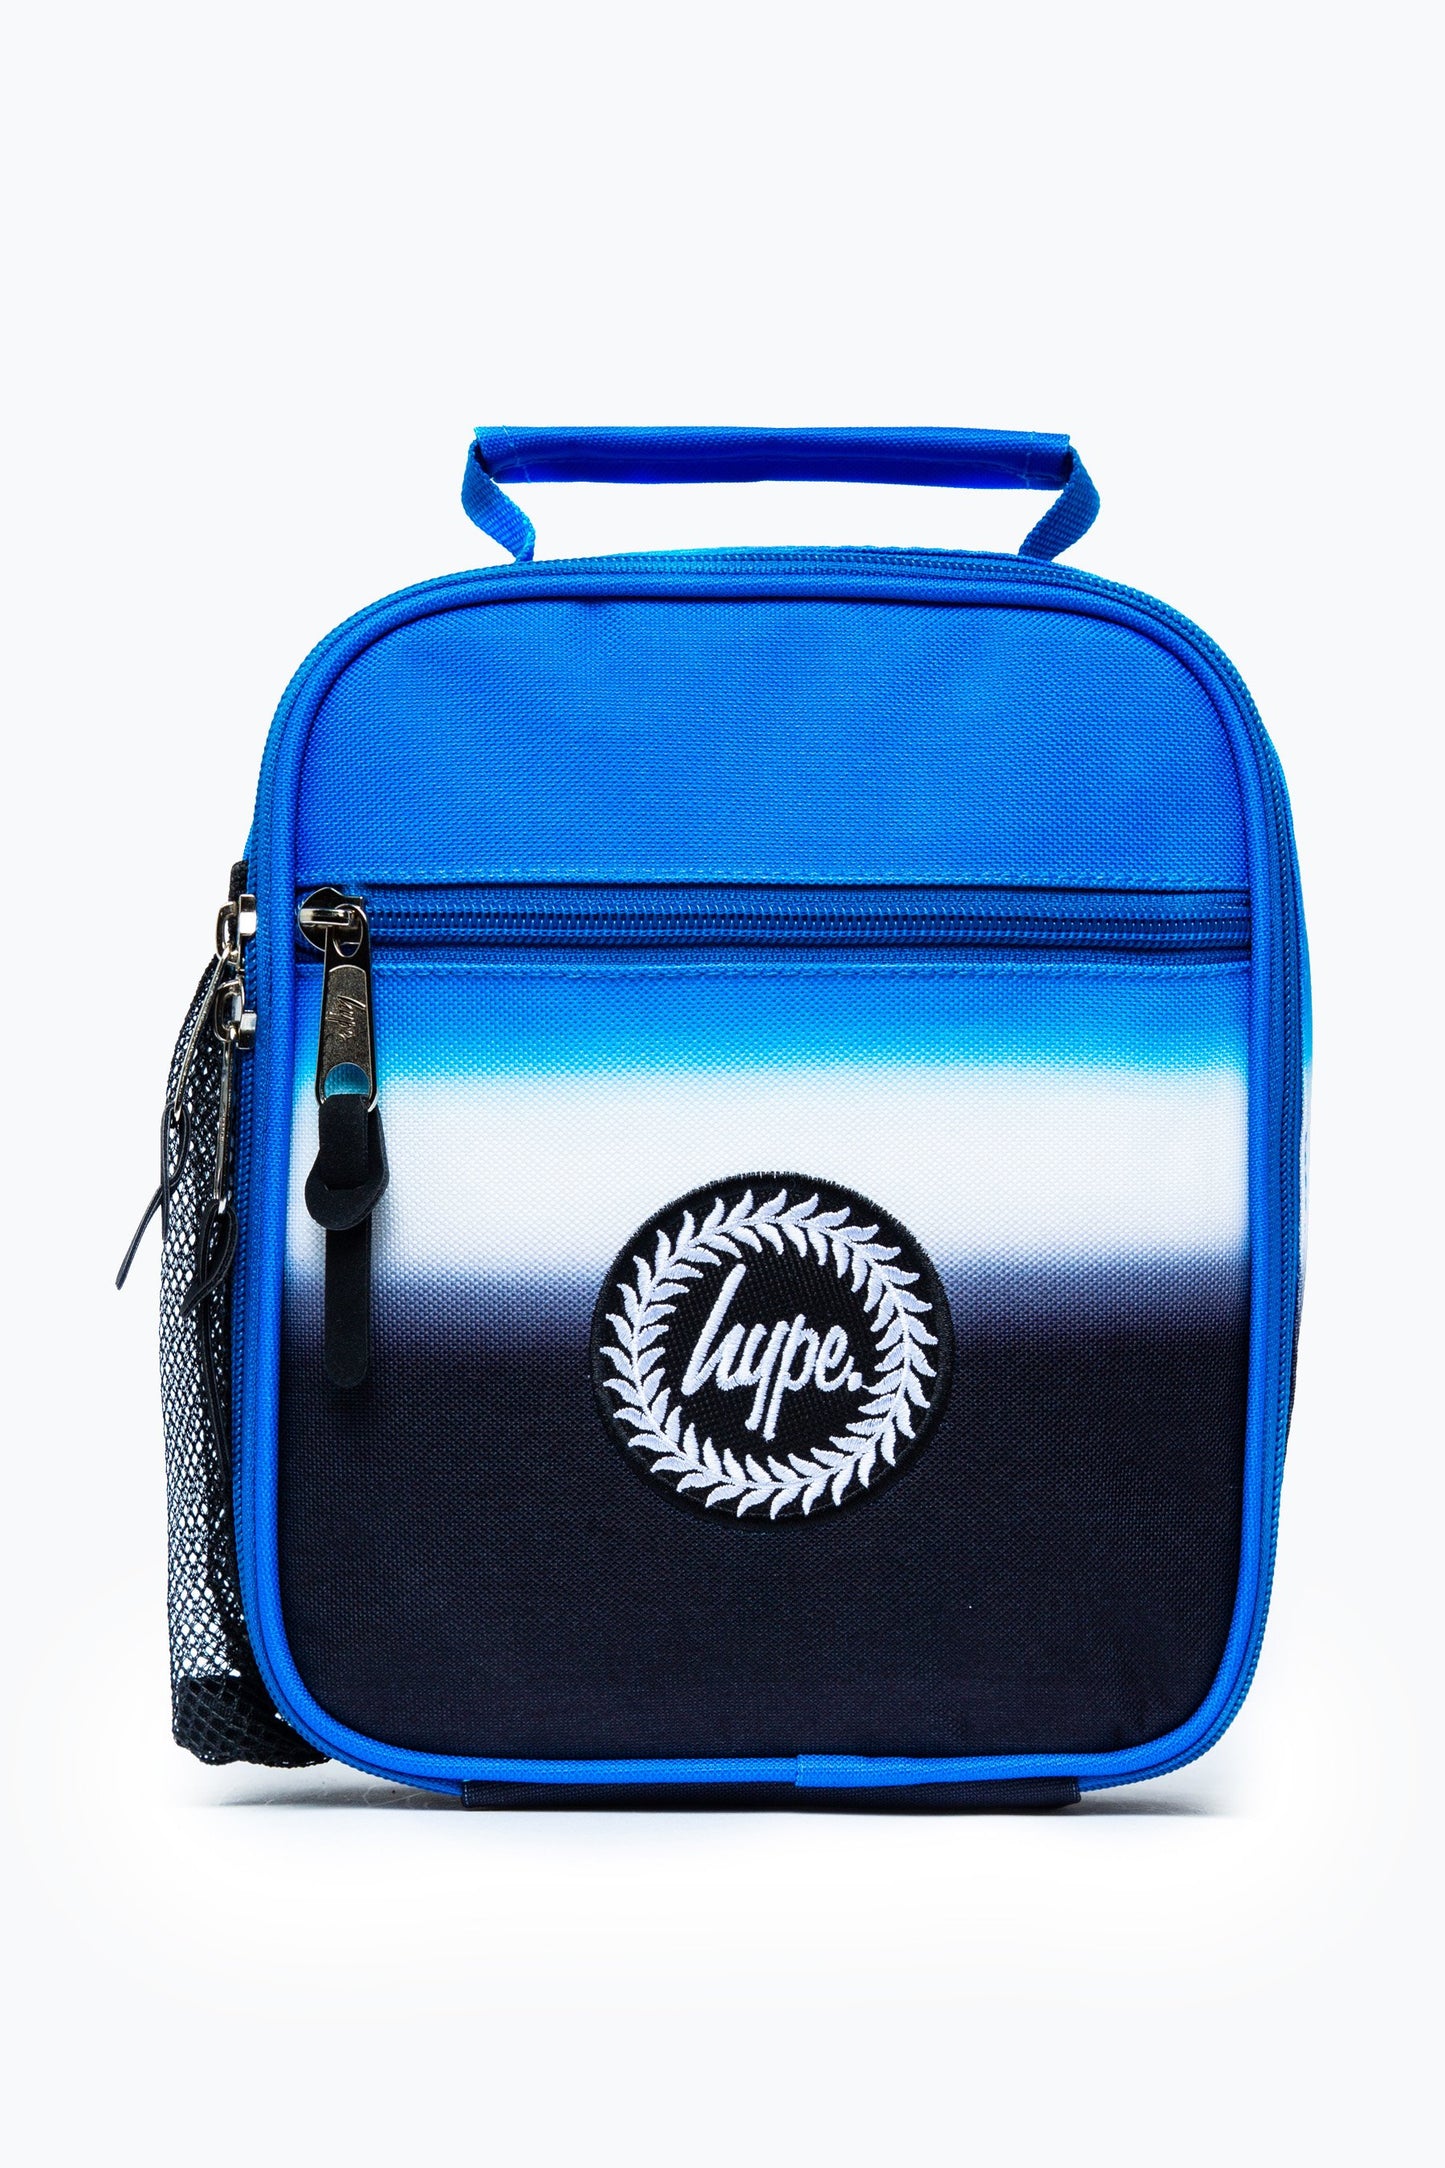 HYPE BLUE BLACK FADE LUNCH BAG